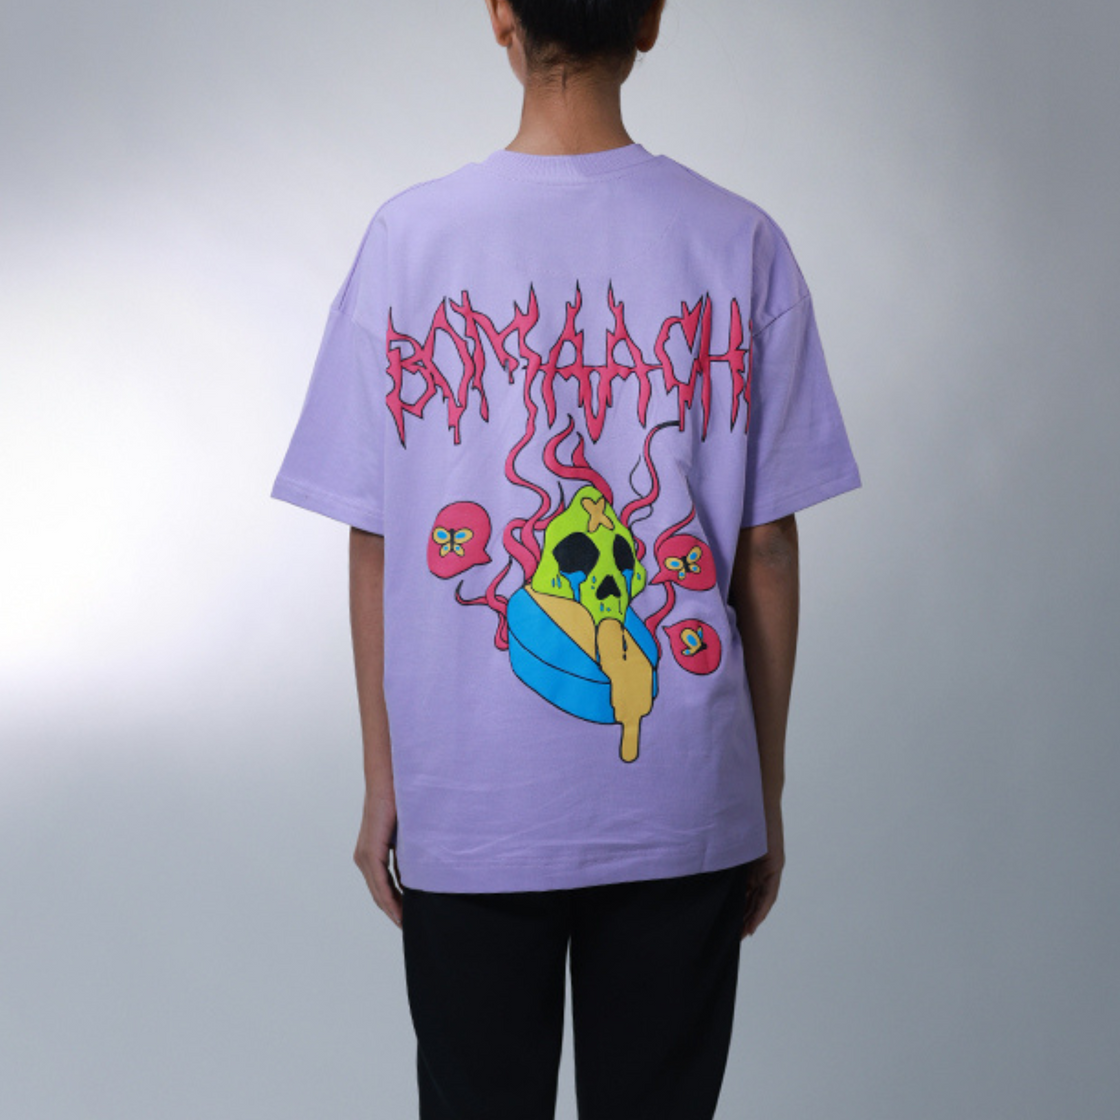 Cheesecaked Demons Printed T-shirt